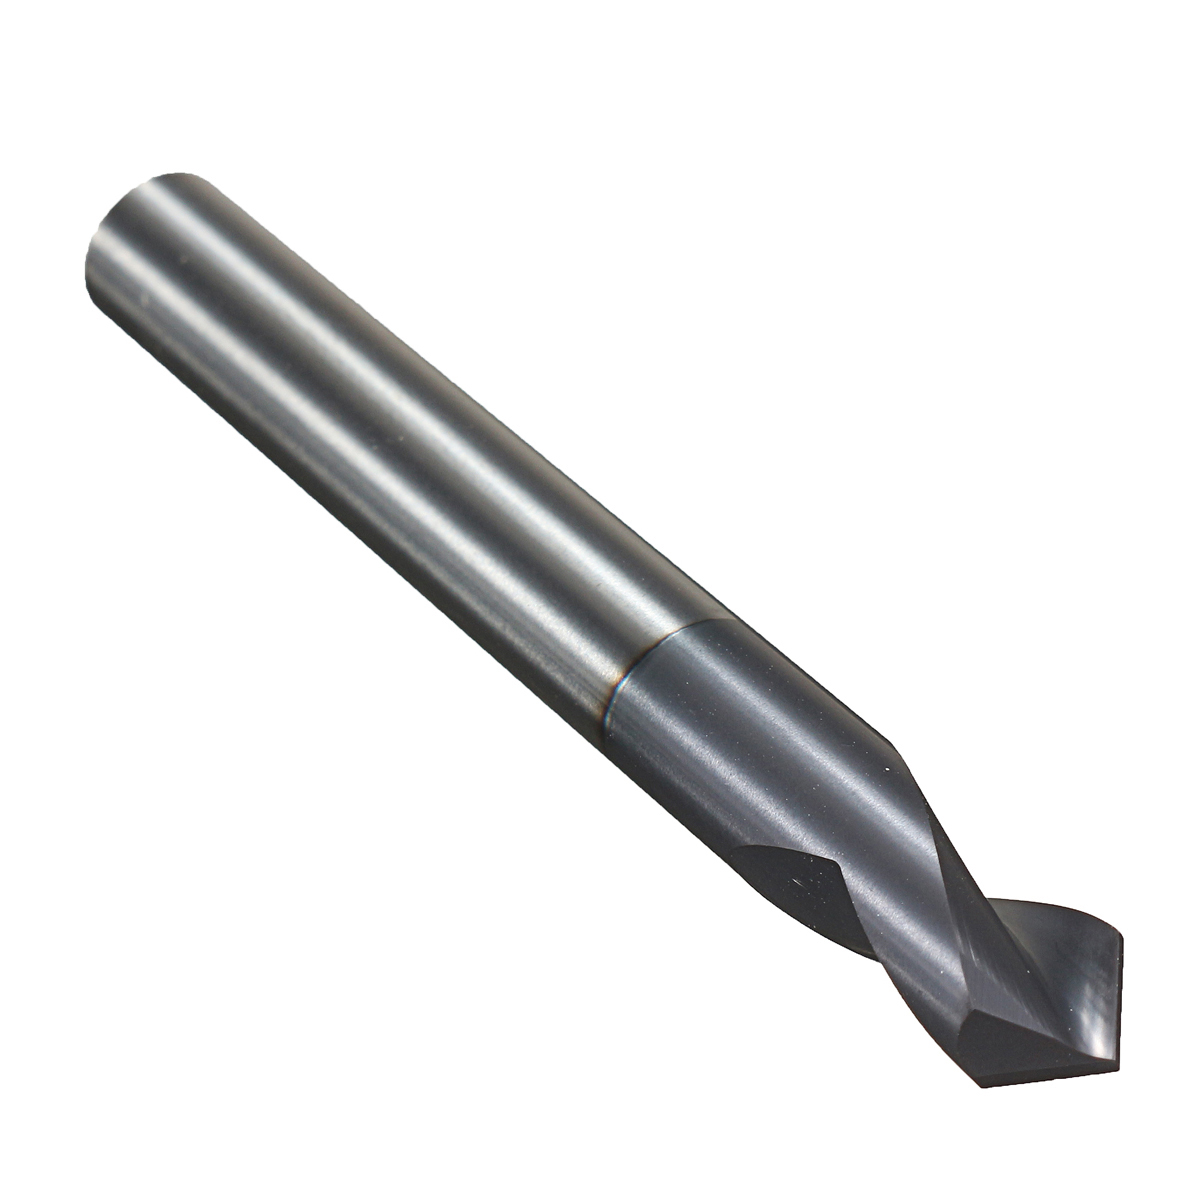 Drillpro-2-Flutes-6mm-Carbide-Chamfer-Mill-90-Degree-HRC45-Milling-Cutter-1108522-5